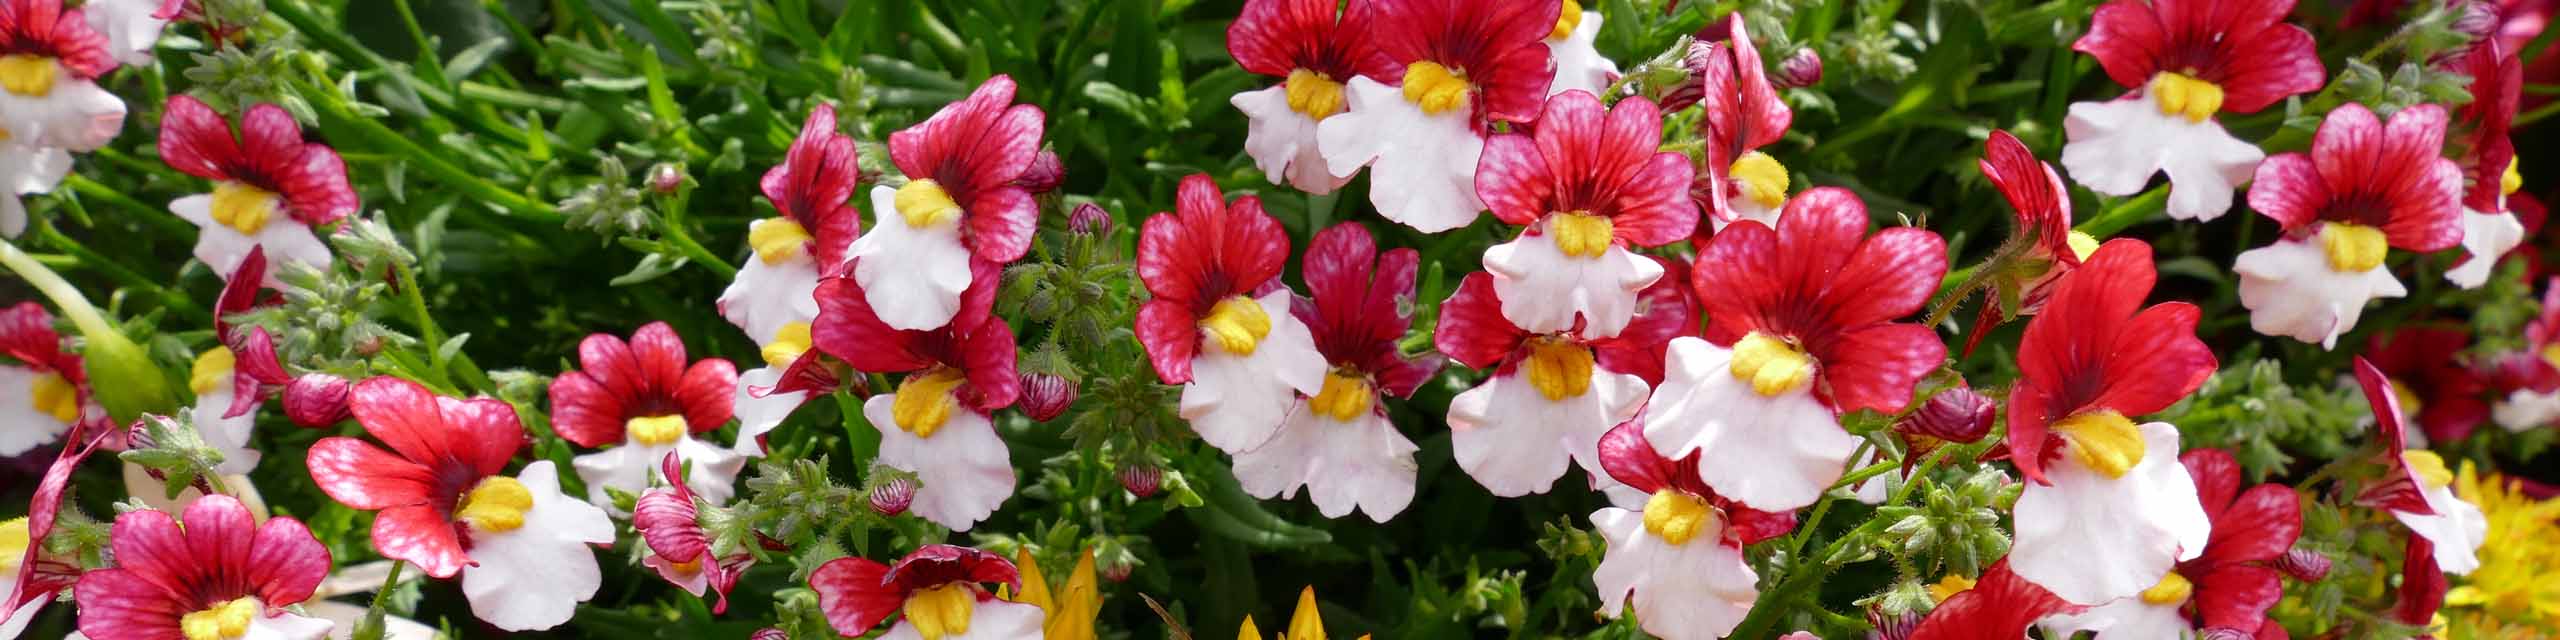 Red and white nemesia flowers in bloom.